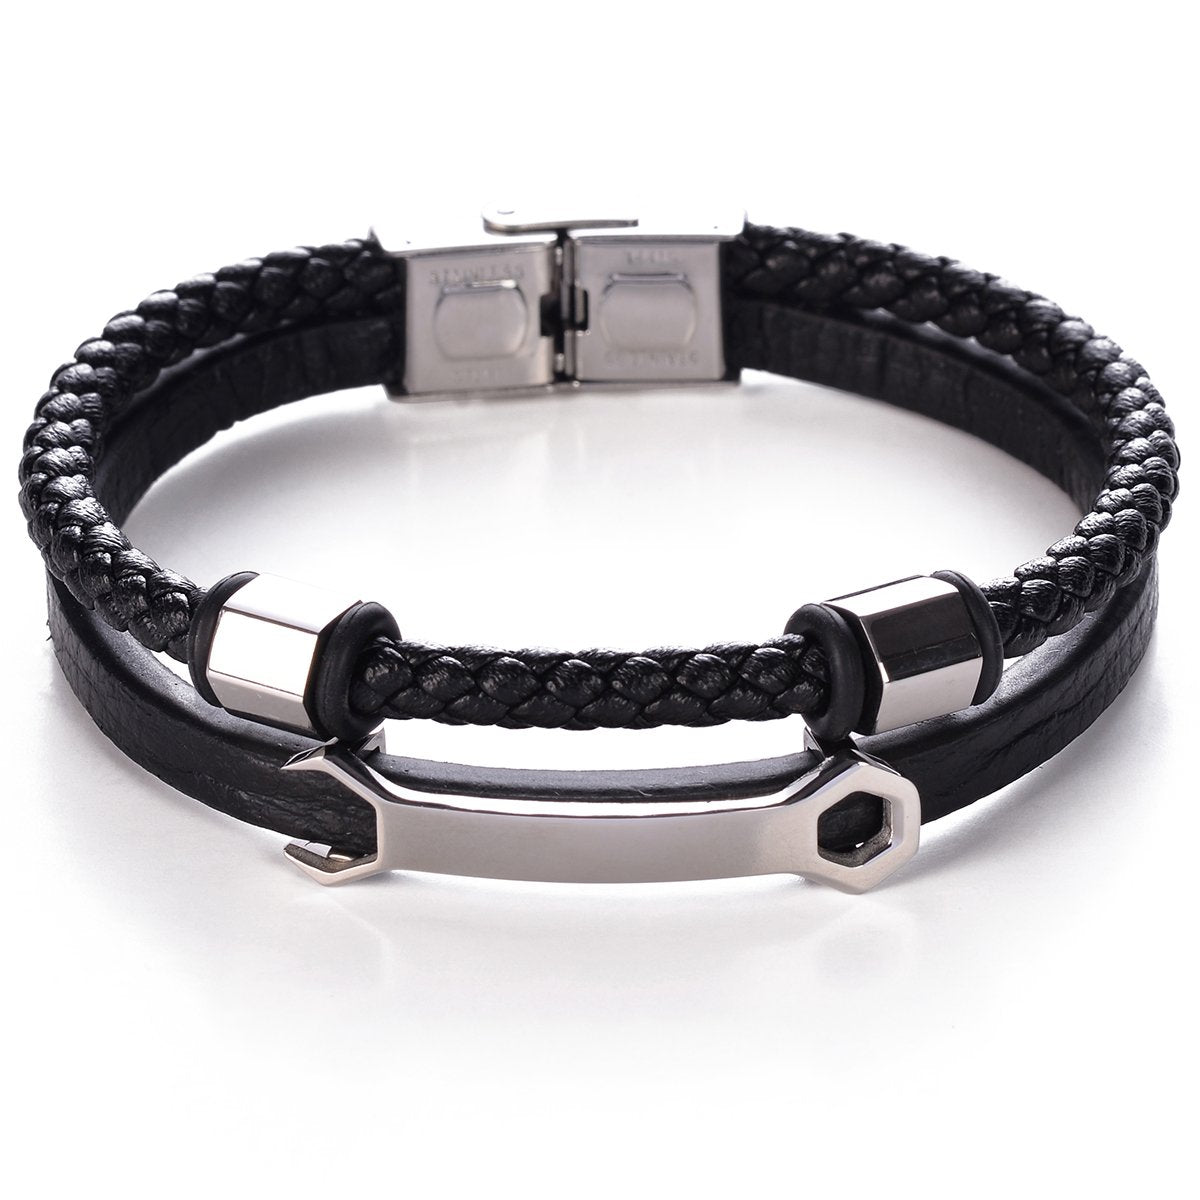 Wrenched Leather Bracelet